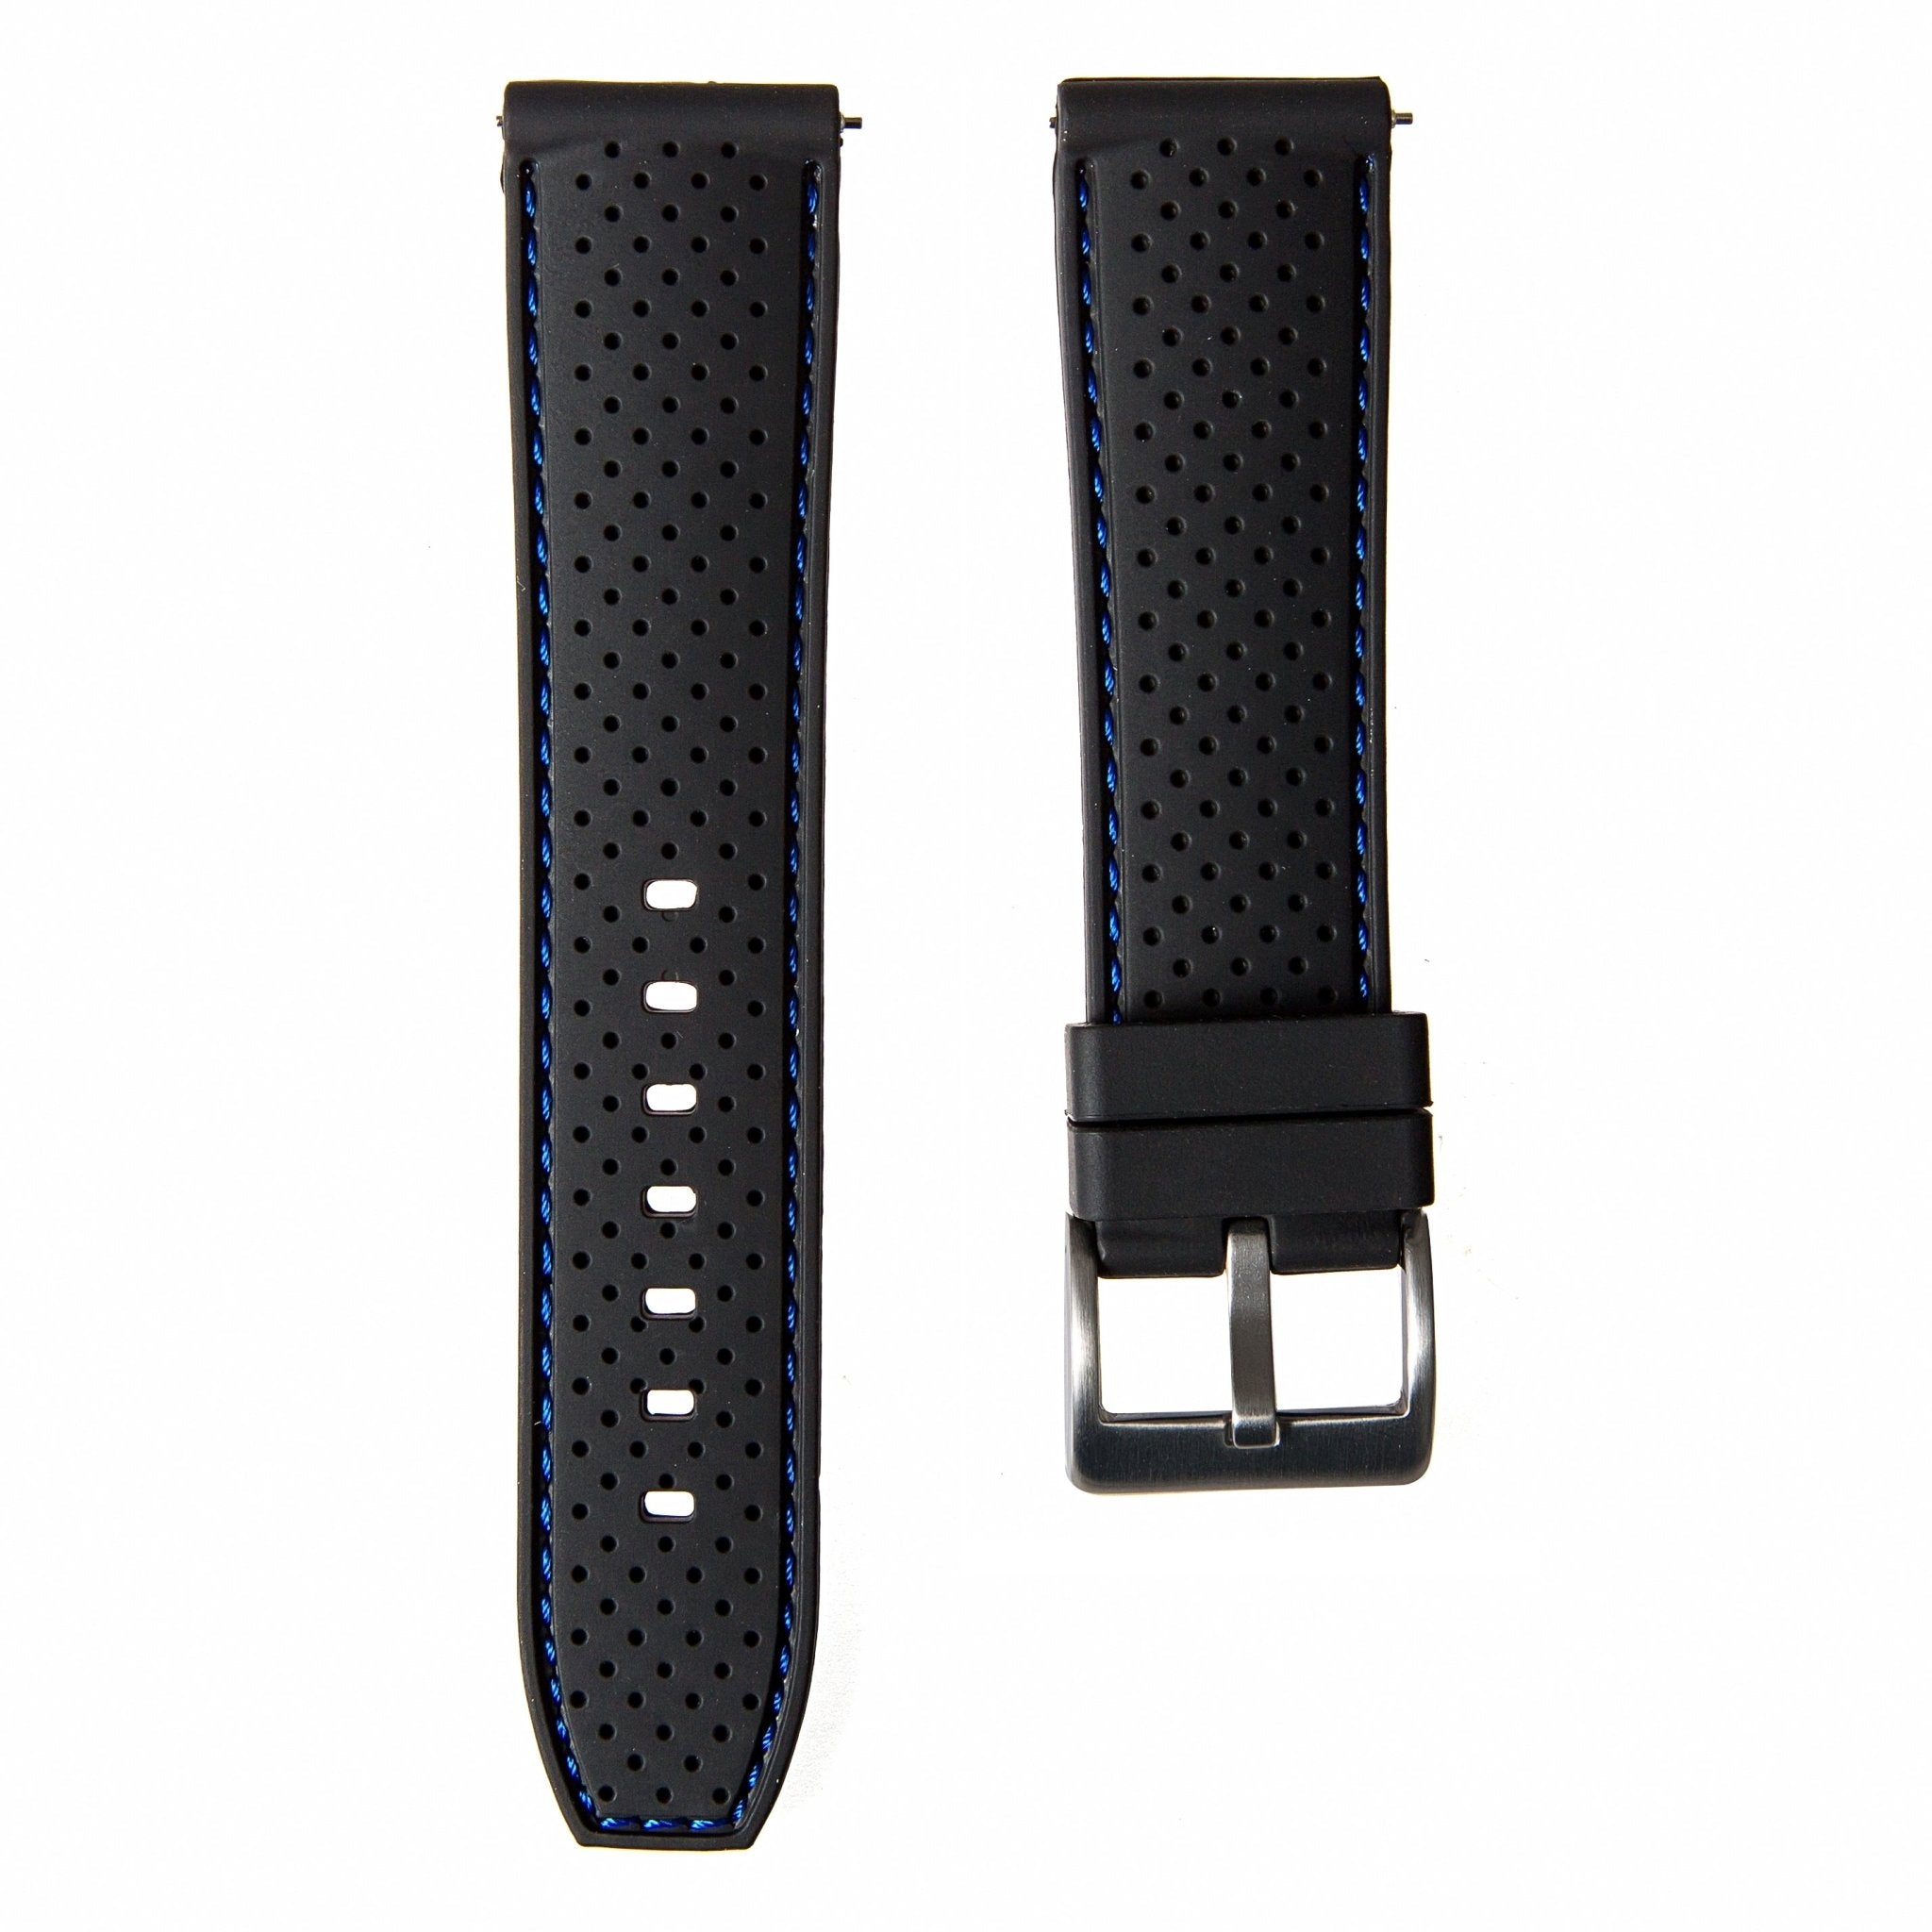 Perforated Stitch Soft Silicone Strap - Quick-Release - Black with Blue Stitch (2401) -StrapSeeker